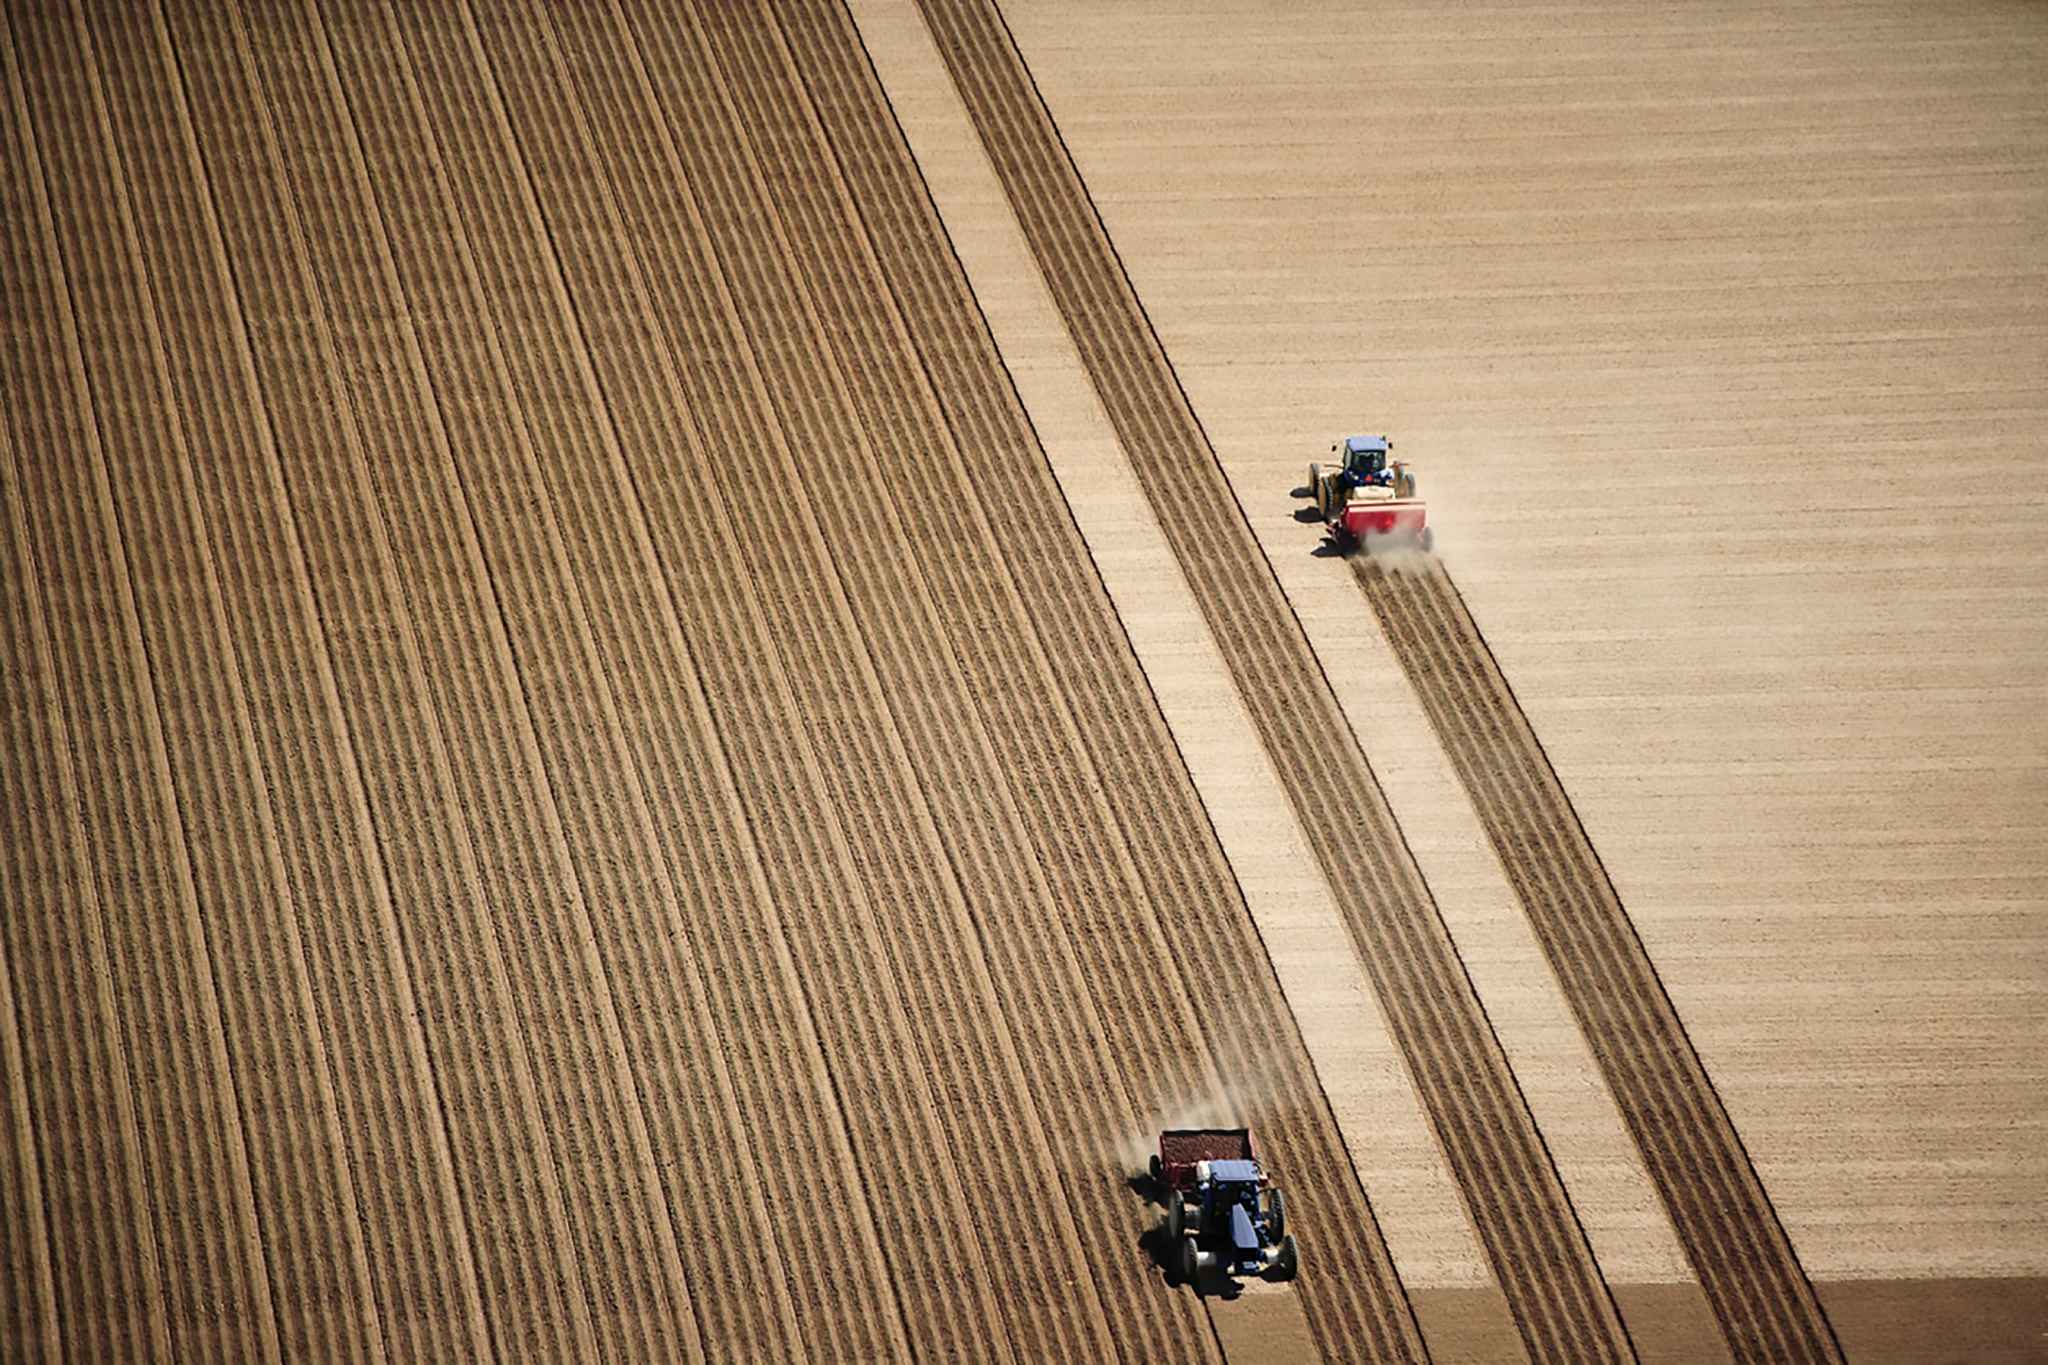 Farmers drive tractors in a large field.